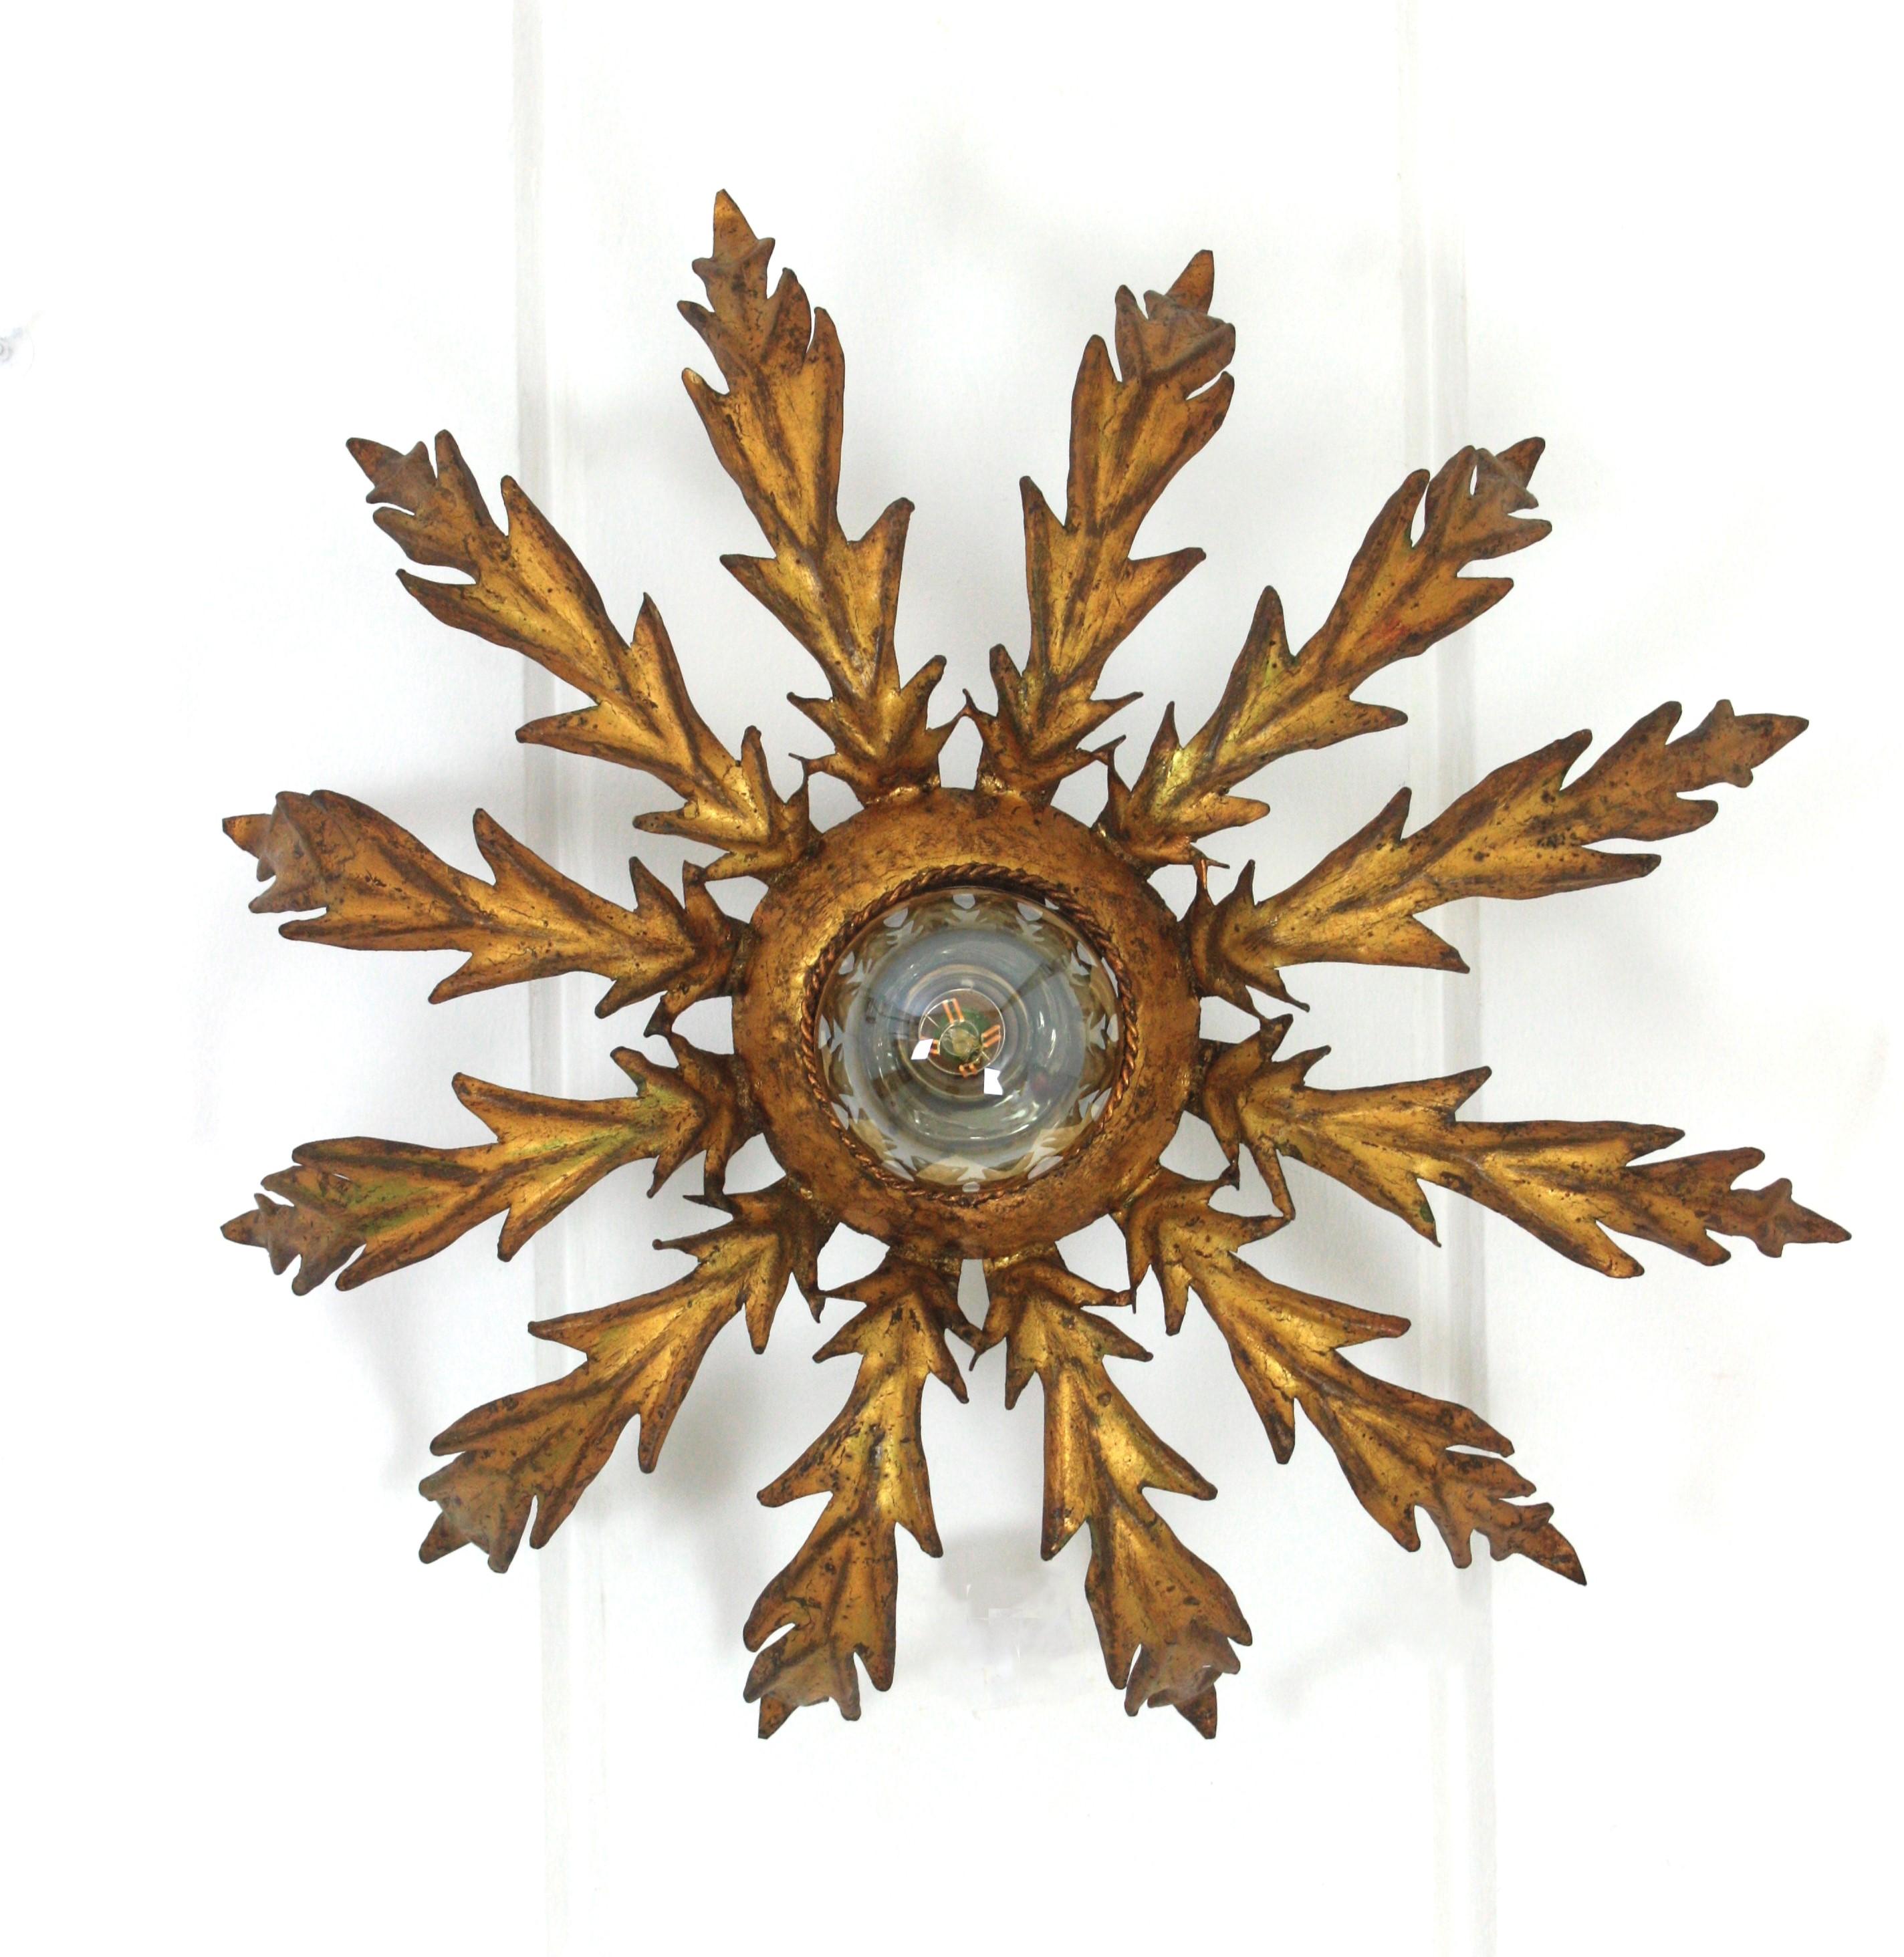 20th Century French Sunburst Leafed Ceiling Light Fixture in Gilt Iron, 1940s For Sale